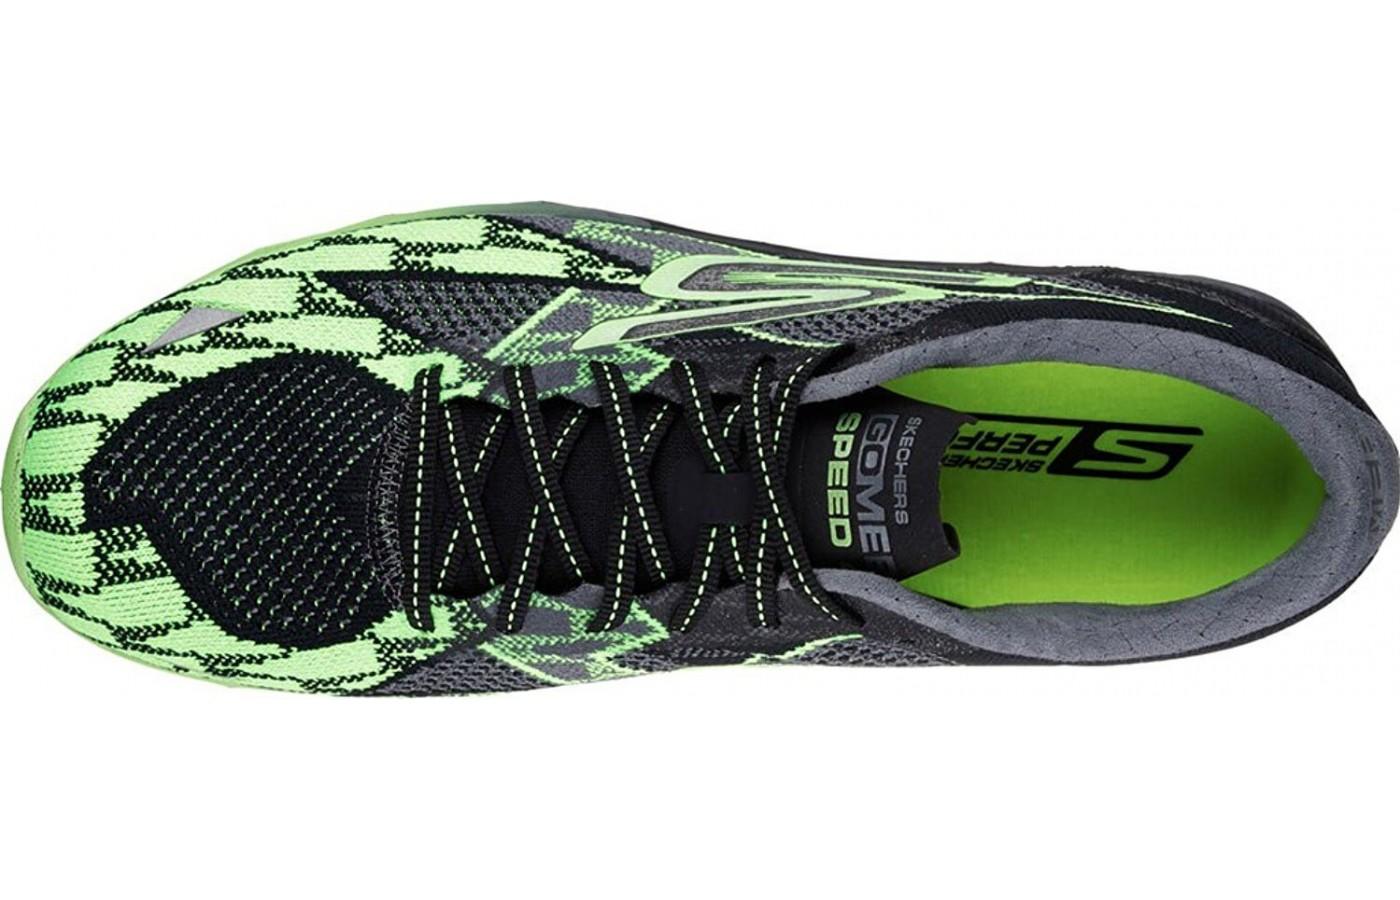 Skechers GoMeb Speed 4 Review - To buy or not in 2023 - StripeFit